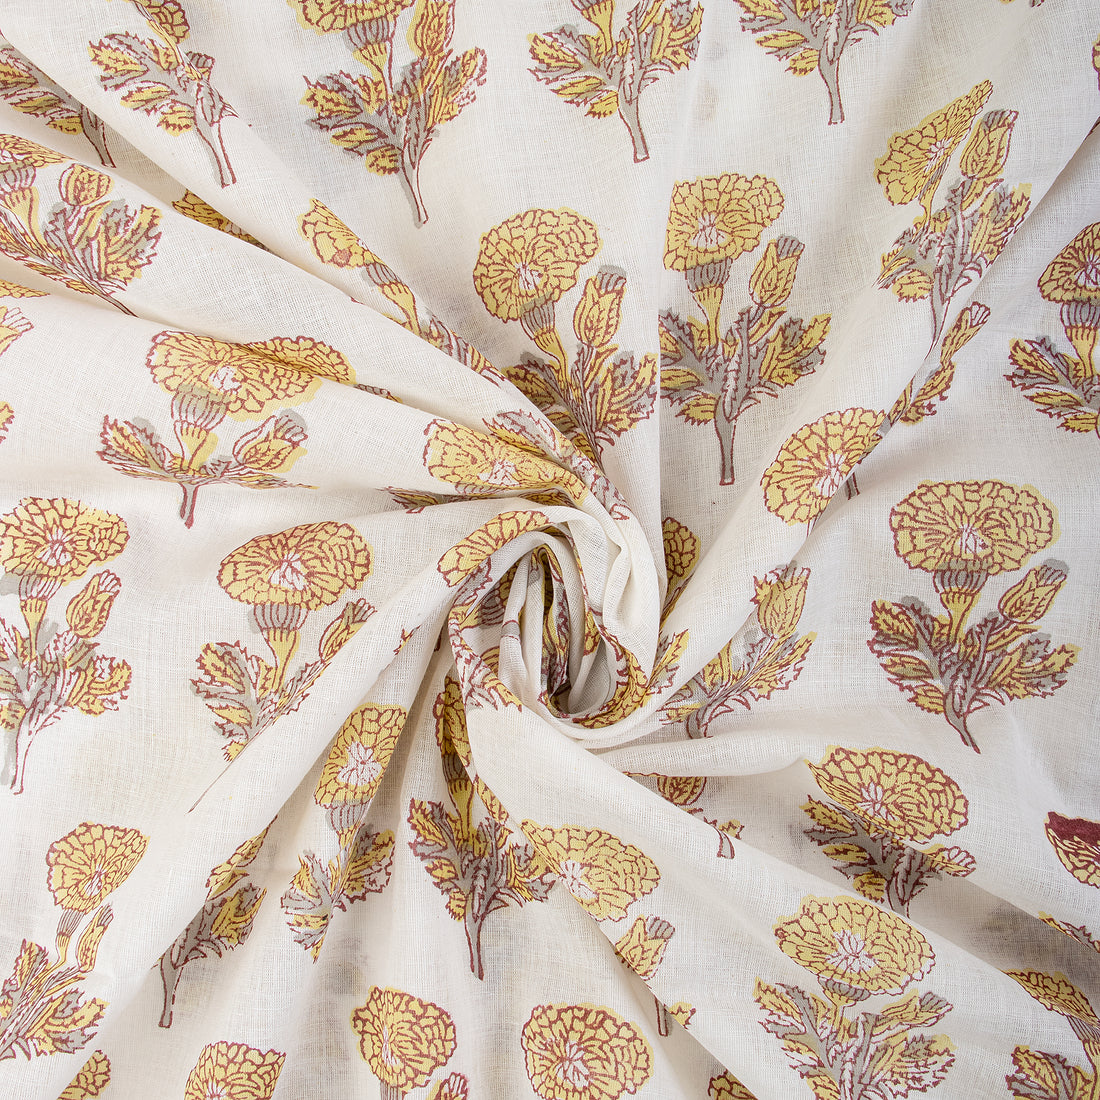 Brown Floral Hand Block And Prints Cotton Fabric For Dress Material